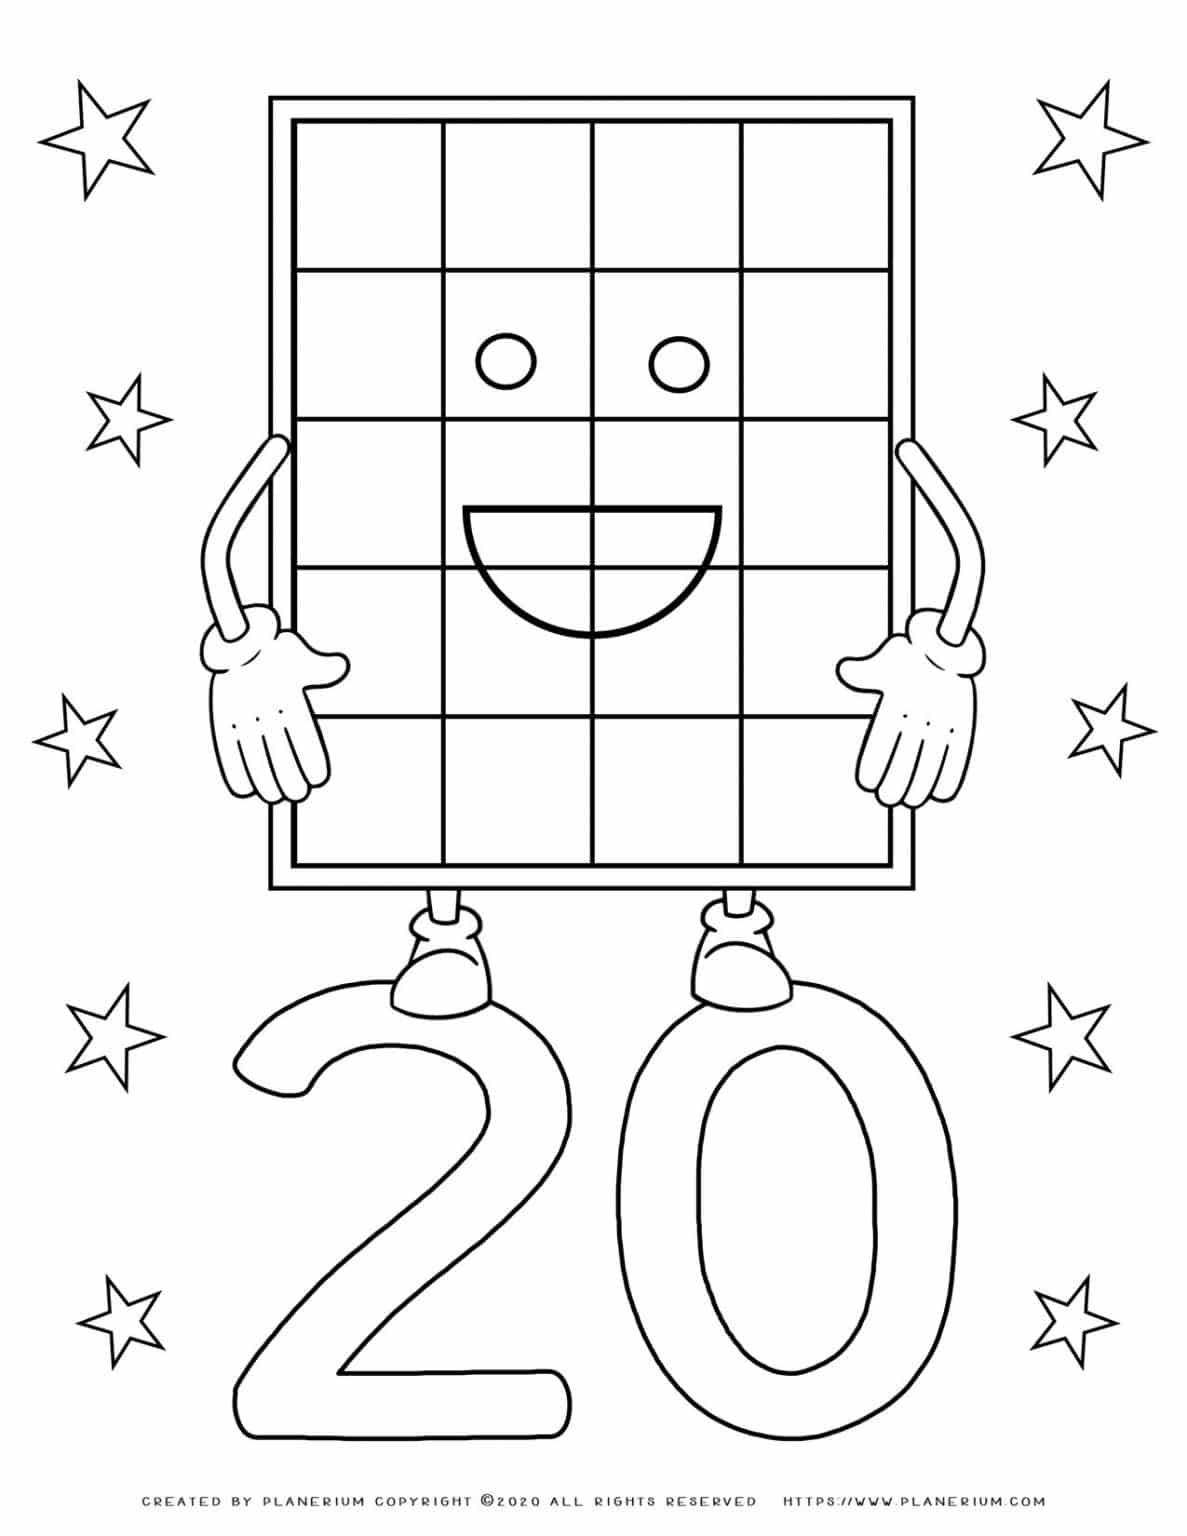 Number Coloring Pages   20   Free Printable   Planerium